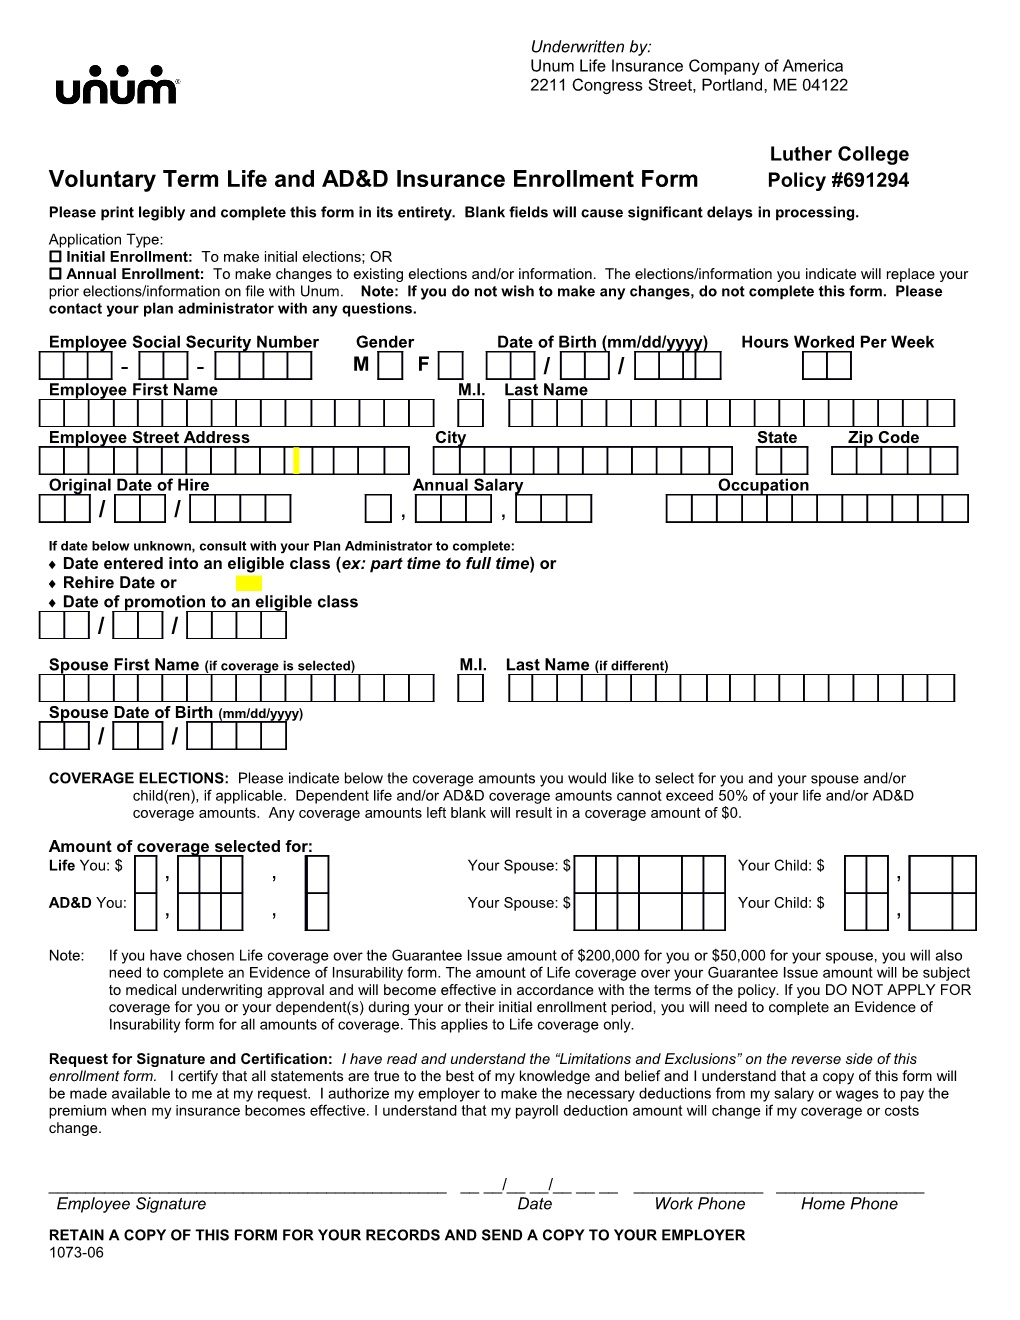 Voluntary Term Life and AD&D Insurance Enrollment Form Policy #691294